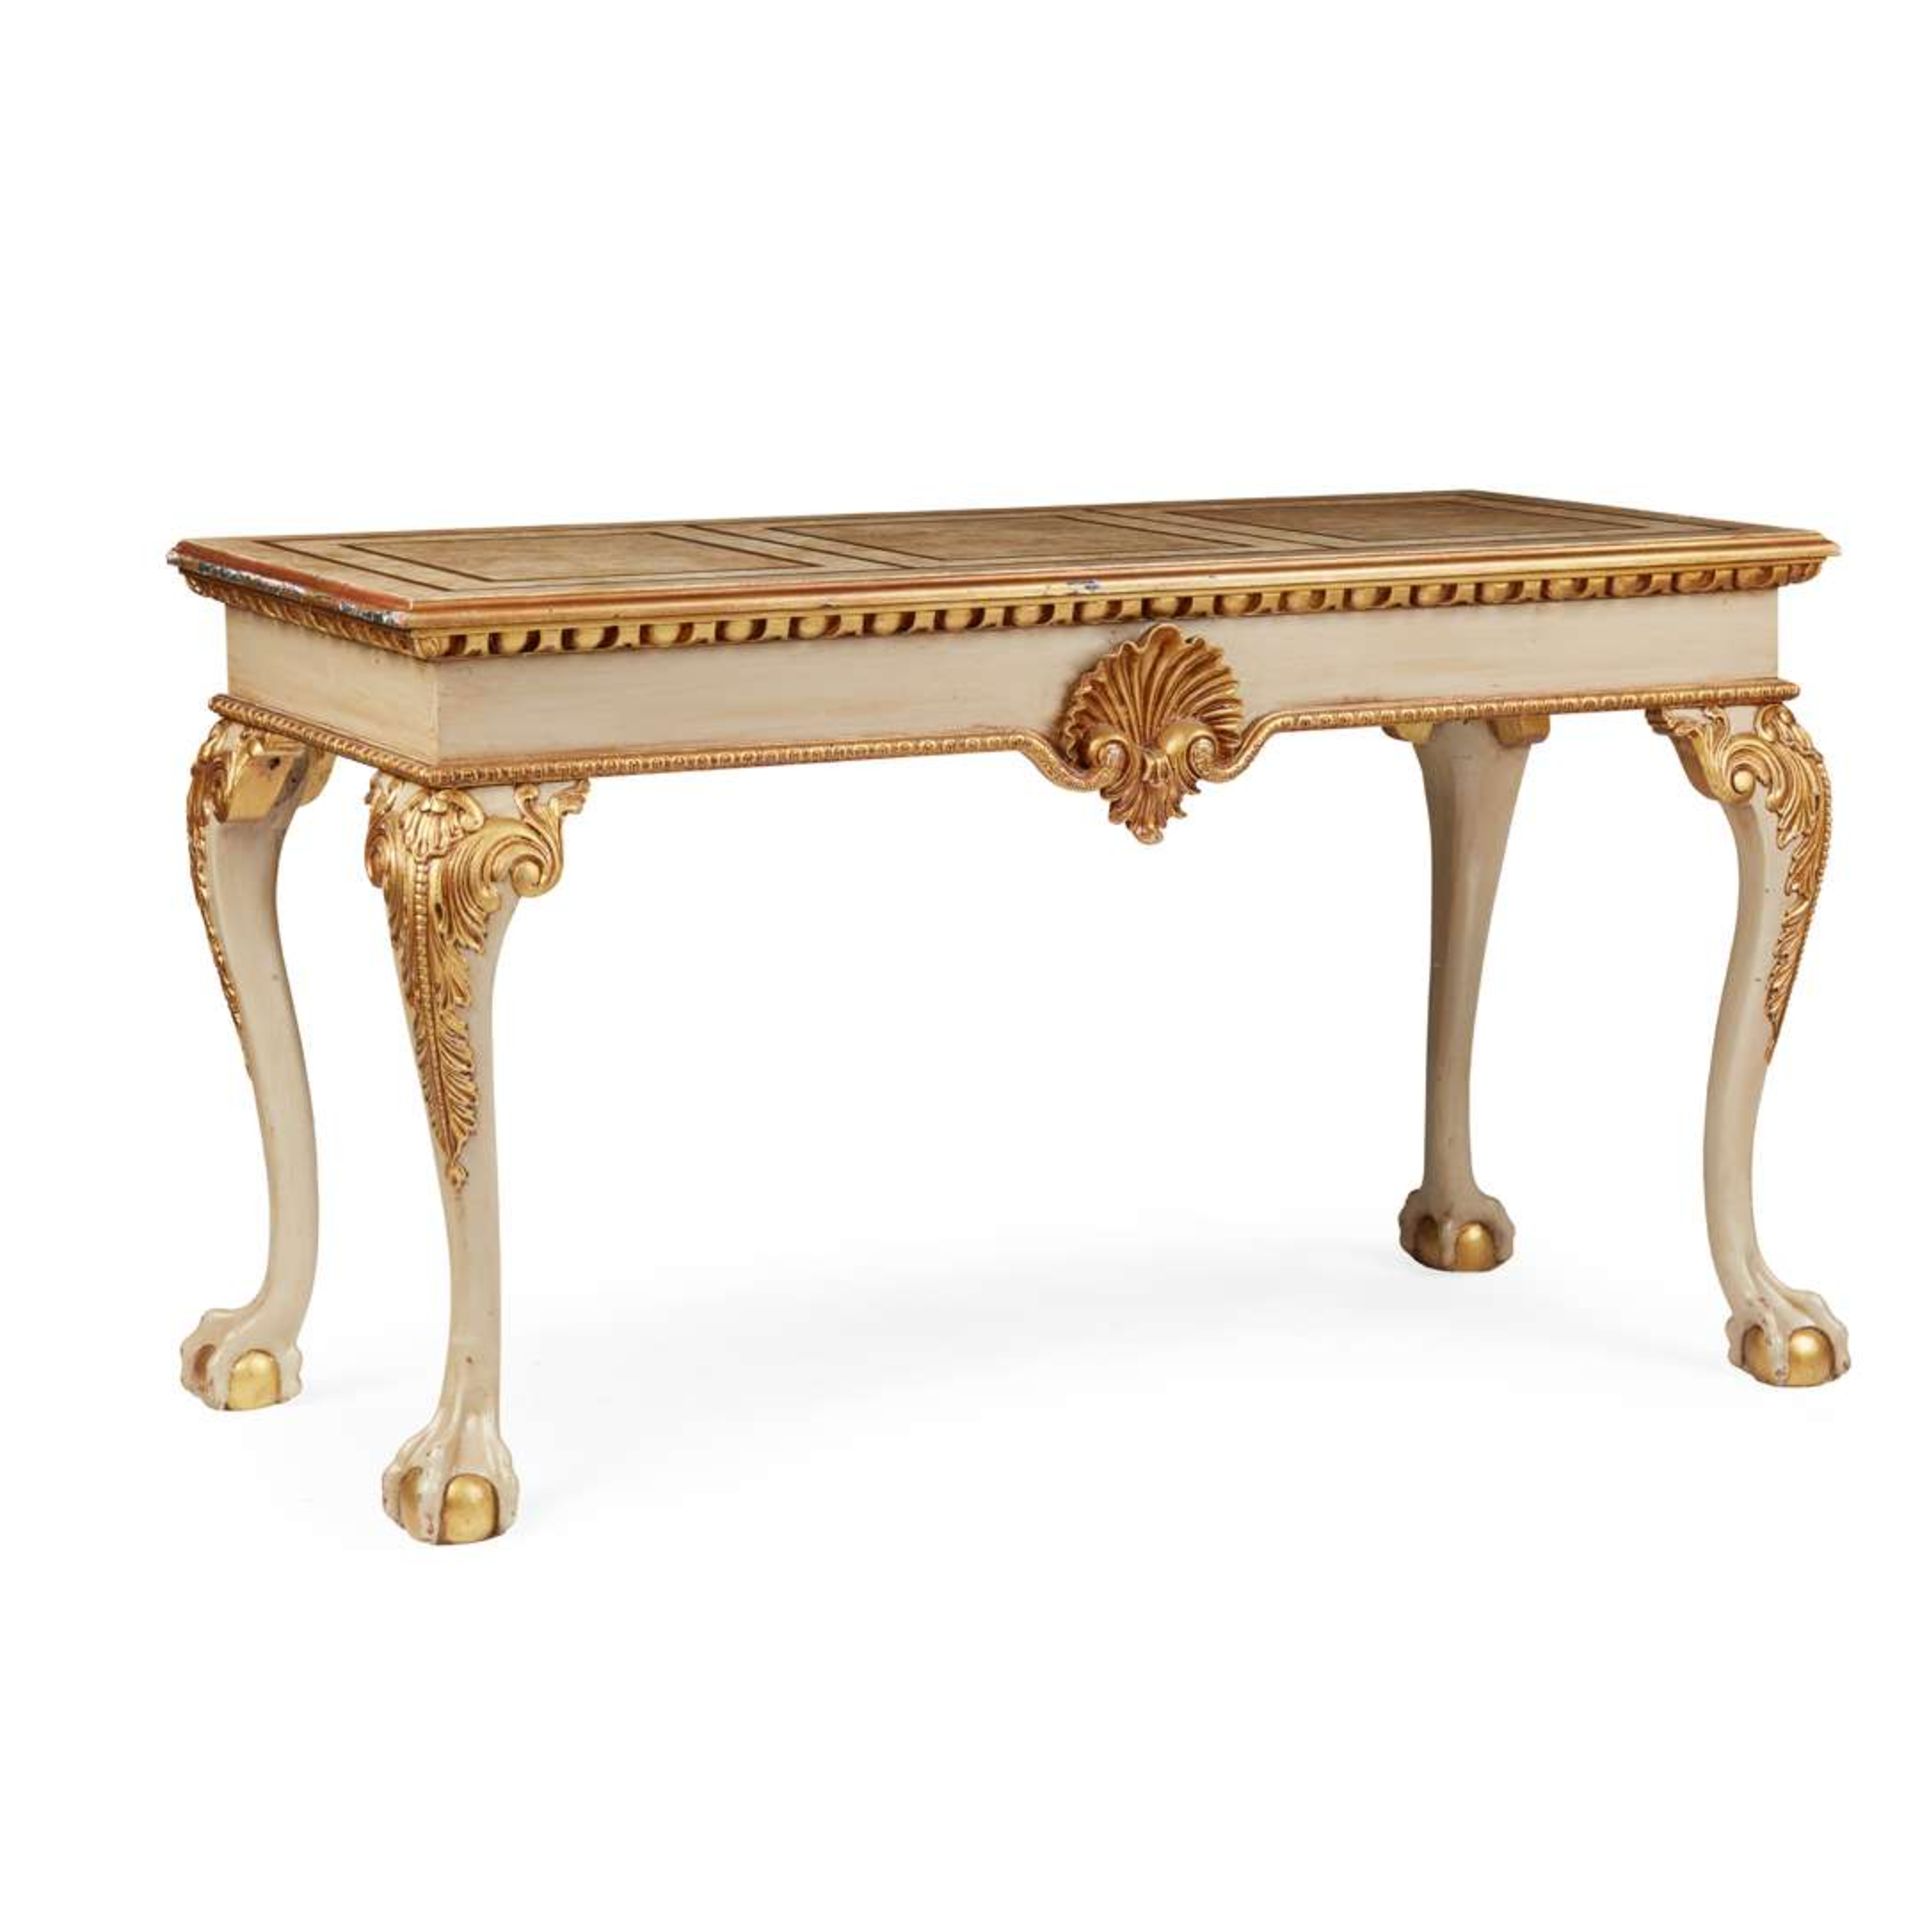 PAIR OF GEORGE II STYLE PAINTED AND PARCEL GILT SIDE TABLES - Image 2 of 3